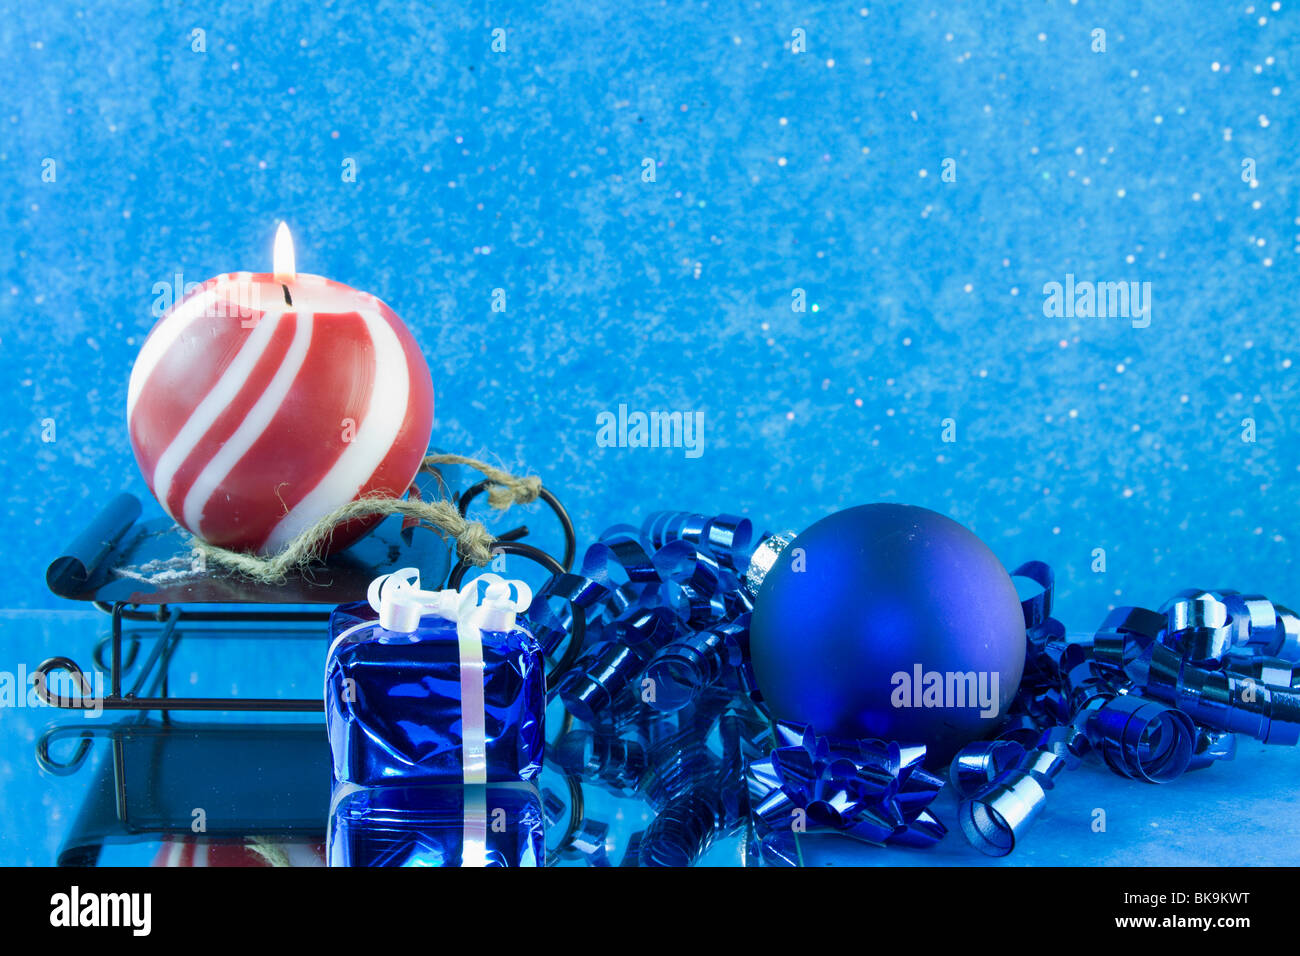 blue Christmas bauble, ribbon, present with red and white striped candle and copyspace Stock Photo